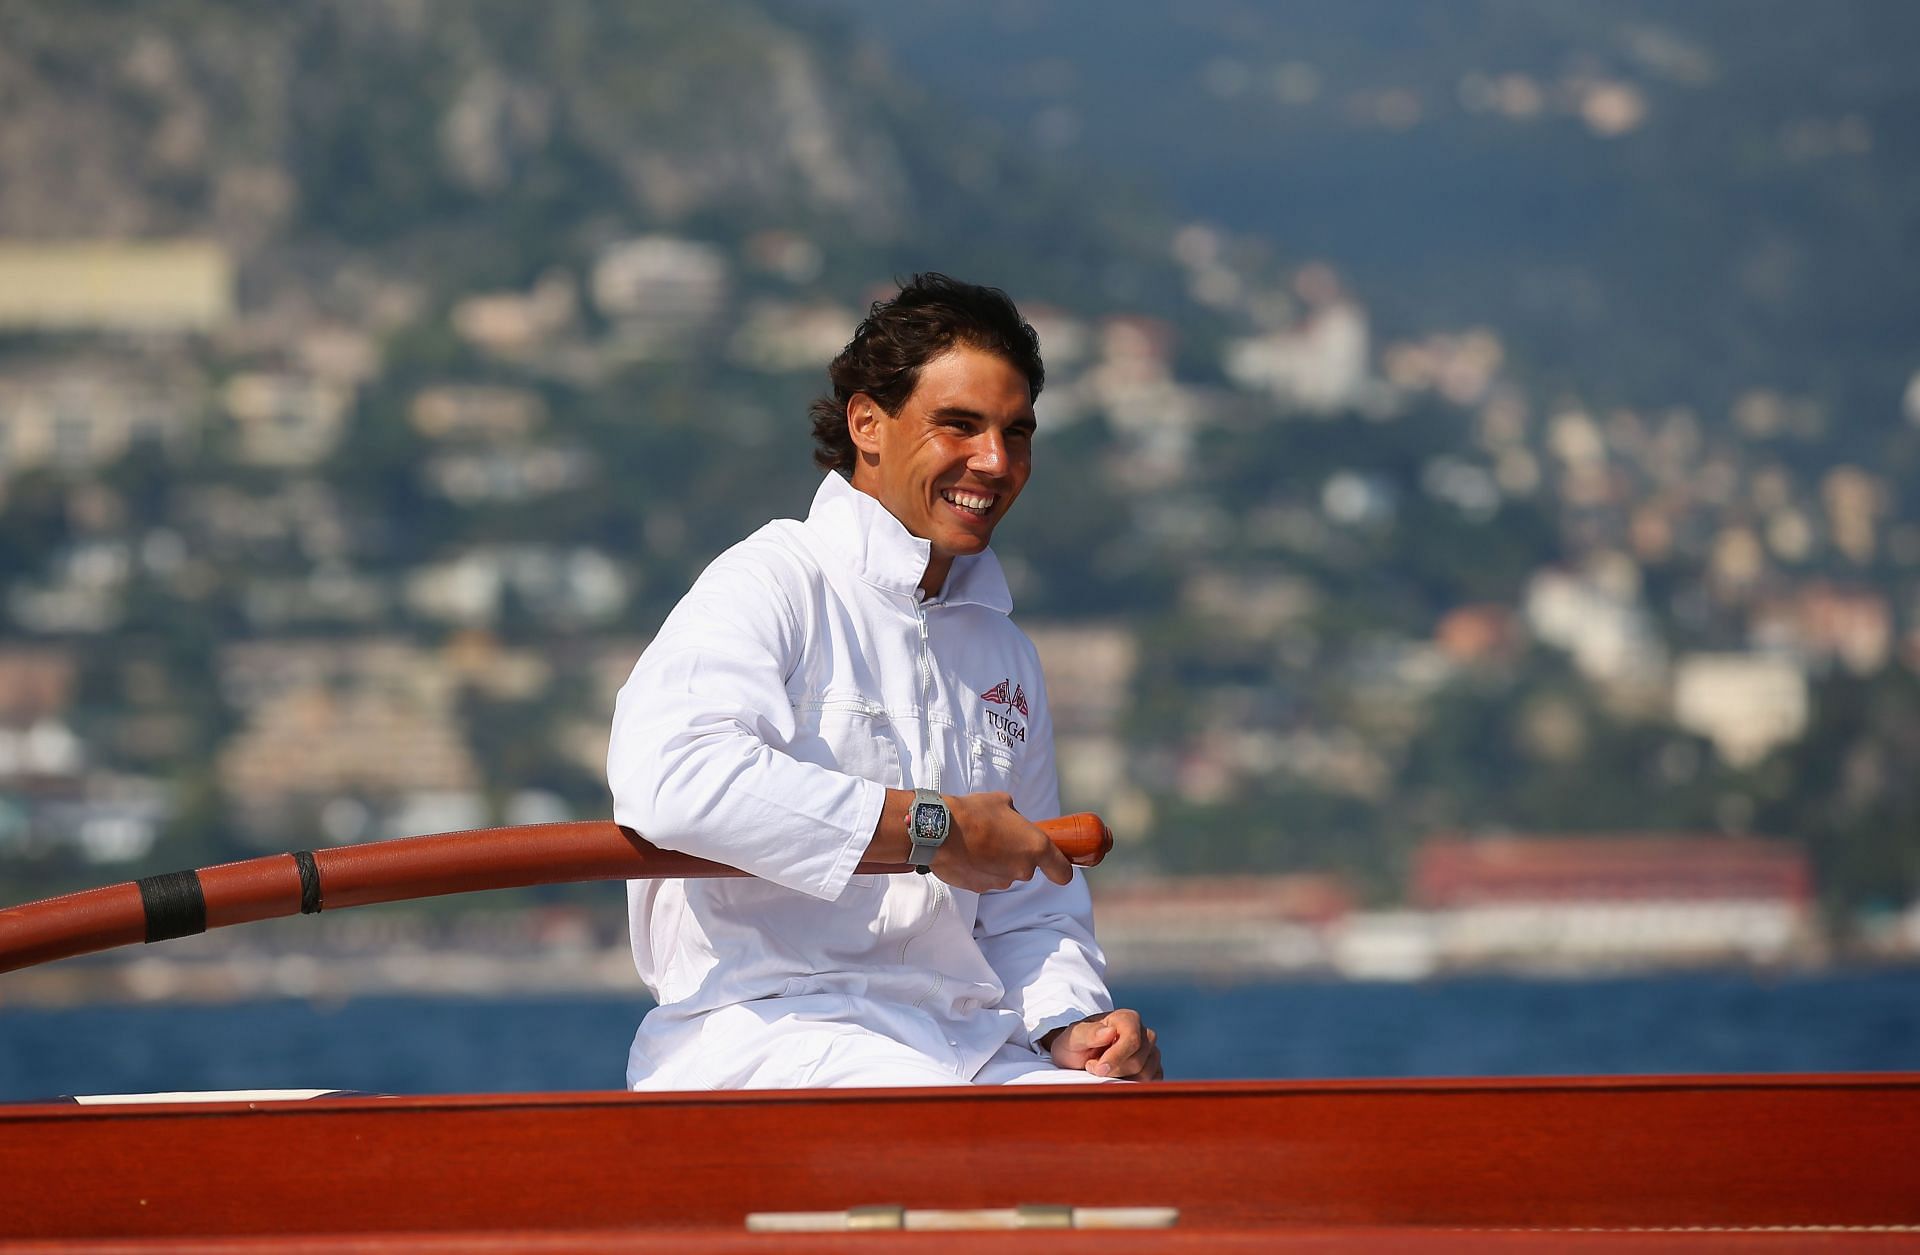 Rafael Nadal sails a boat ahead of the 2014 Monte Carlo Masters